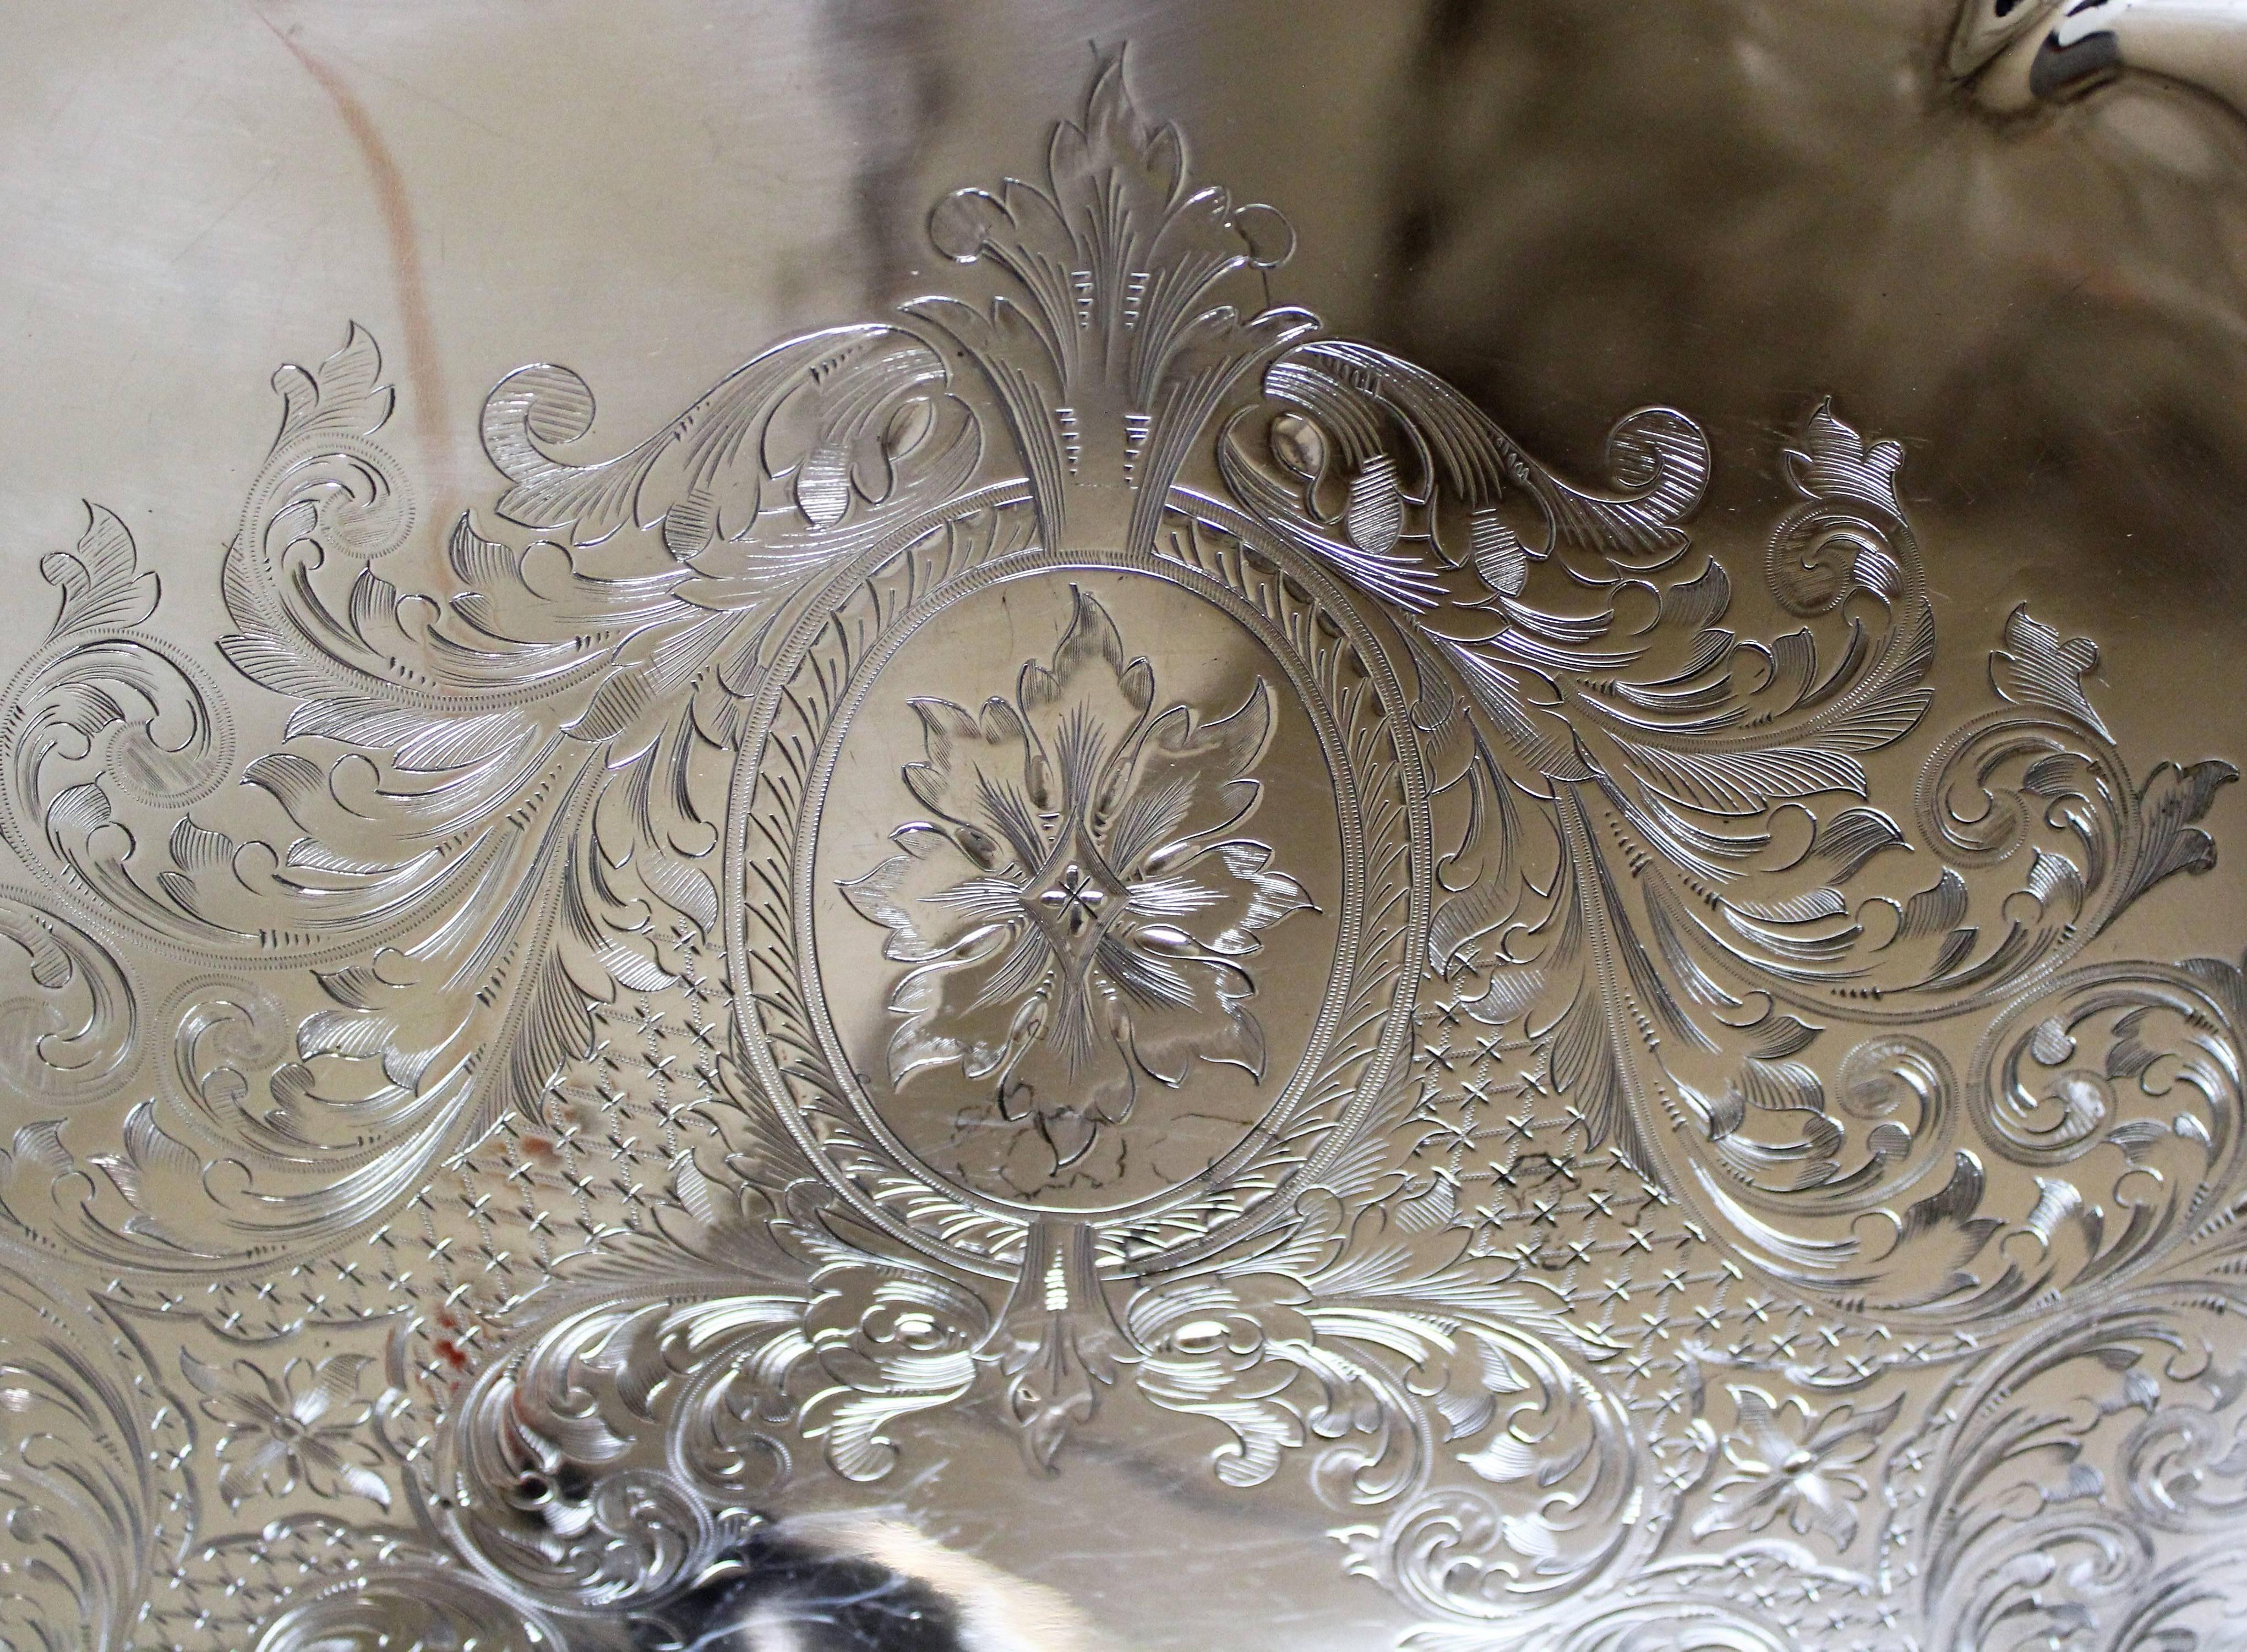 British 19th Century Sheffield Silverplate Serving Tray by John Round and Sons